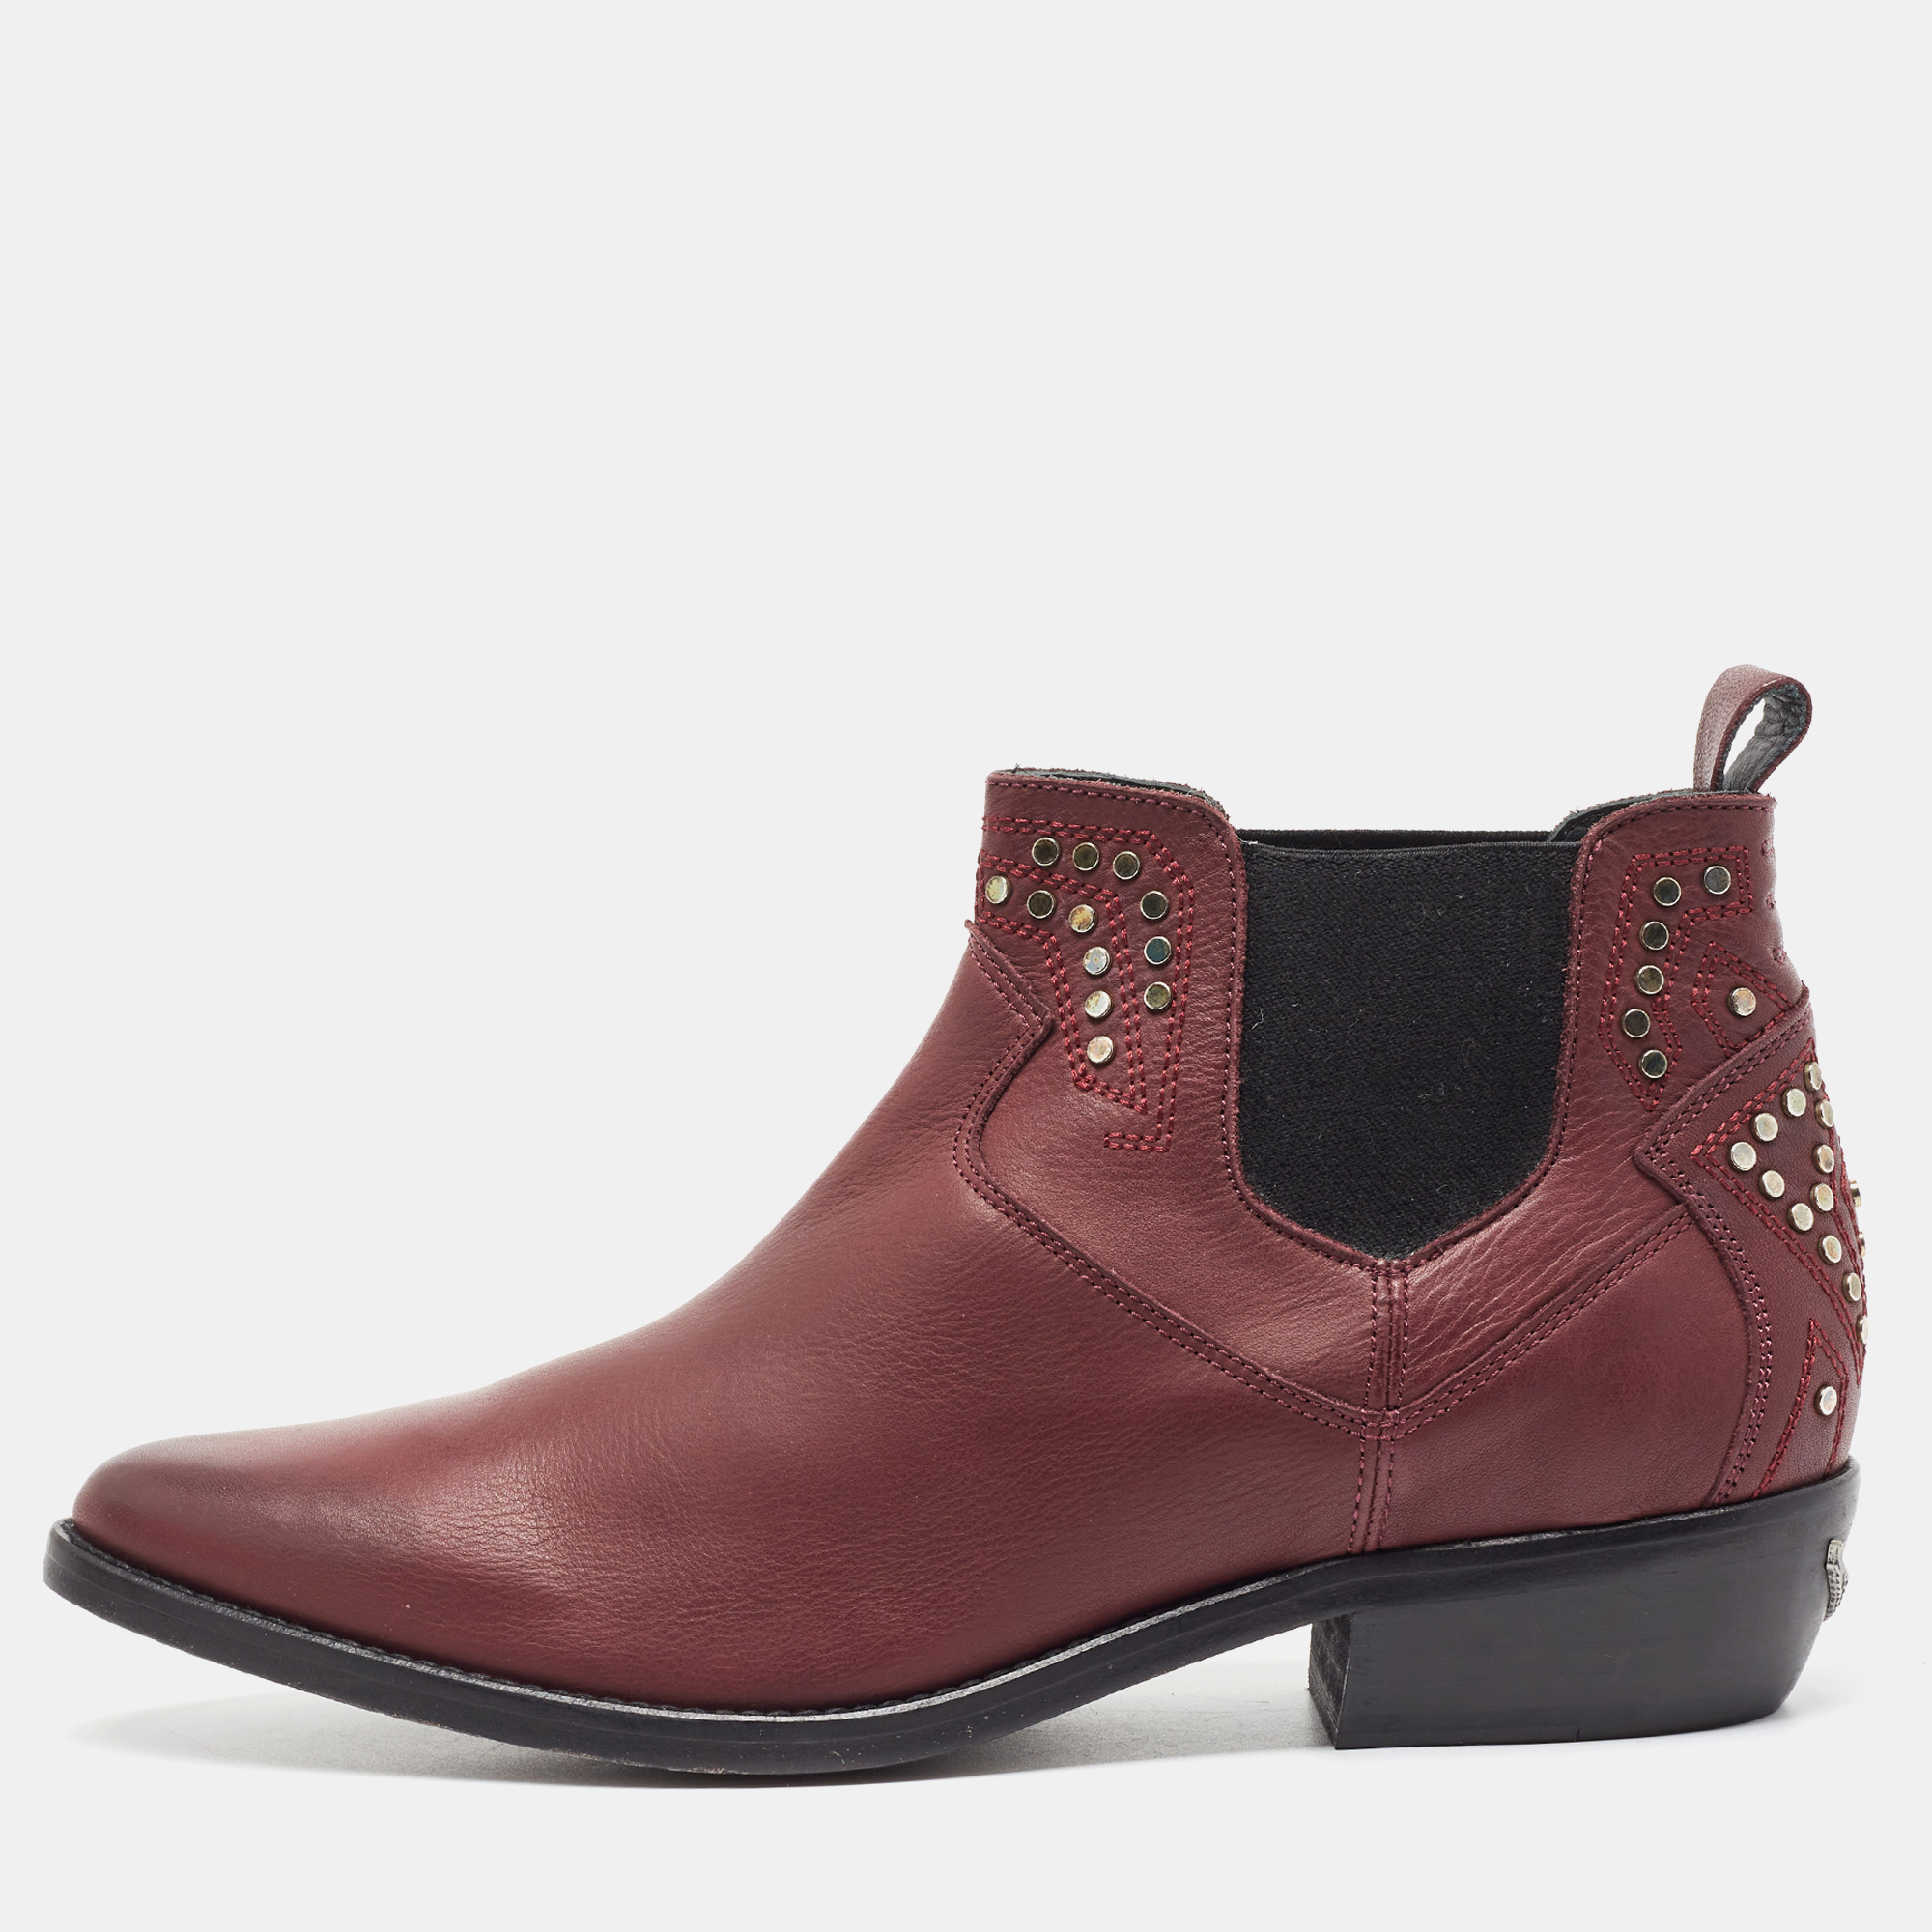 Zadig & Voltaire Burgundy Leather Thylana Studded Ankle Boots Size 41